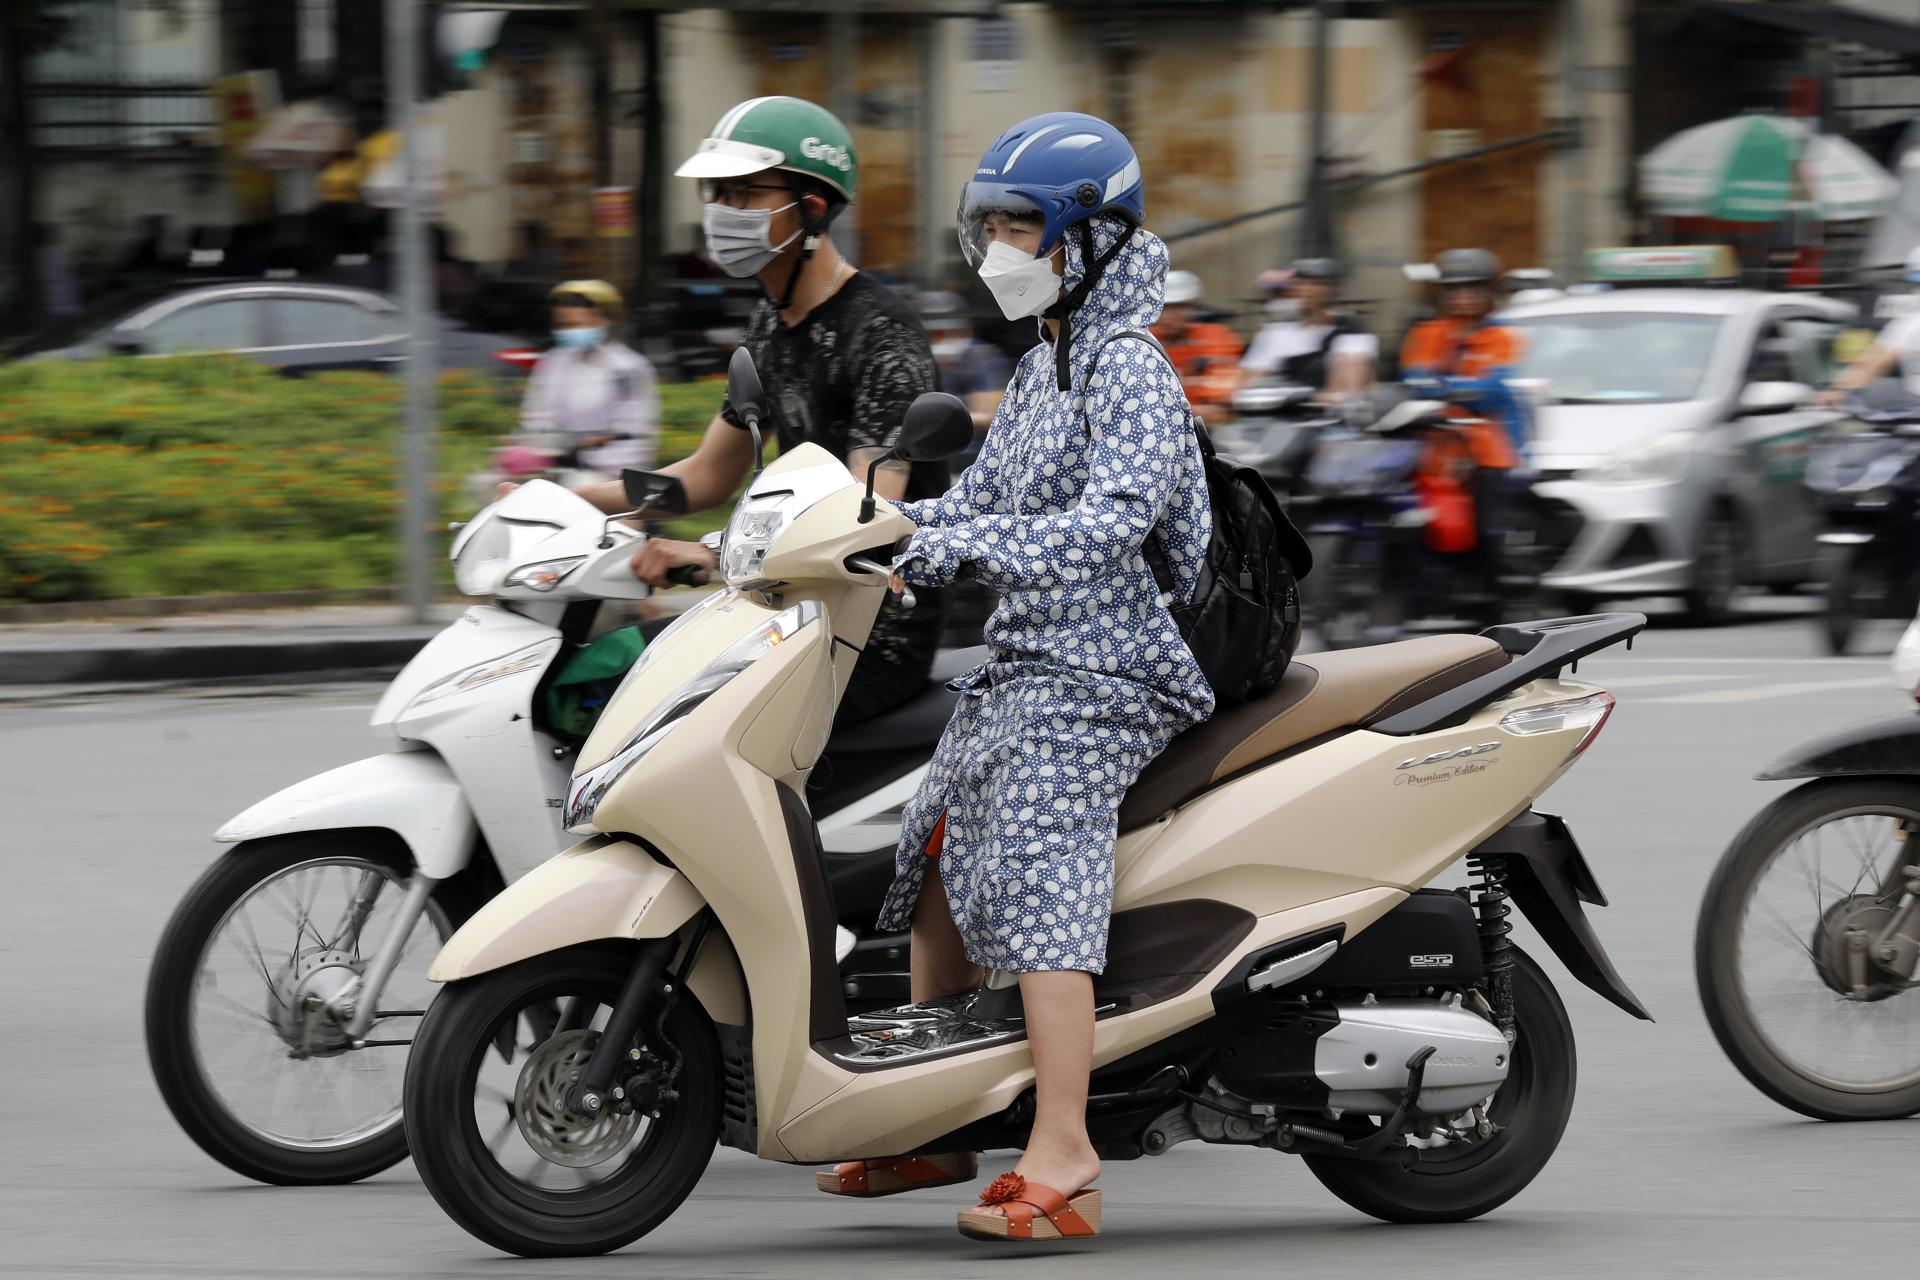 A woman wears long clothing to protect herself from the heat while riding a motorcycle along a street in Hanoi, Vietnam 08 May 2023. EFE-EPA/LUONG THAI LINH